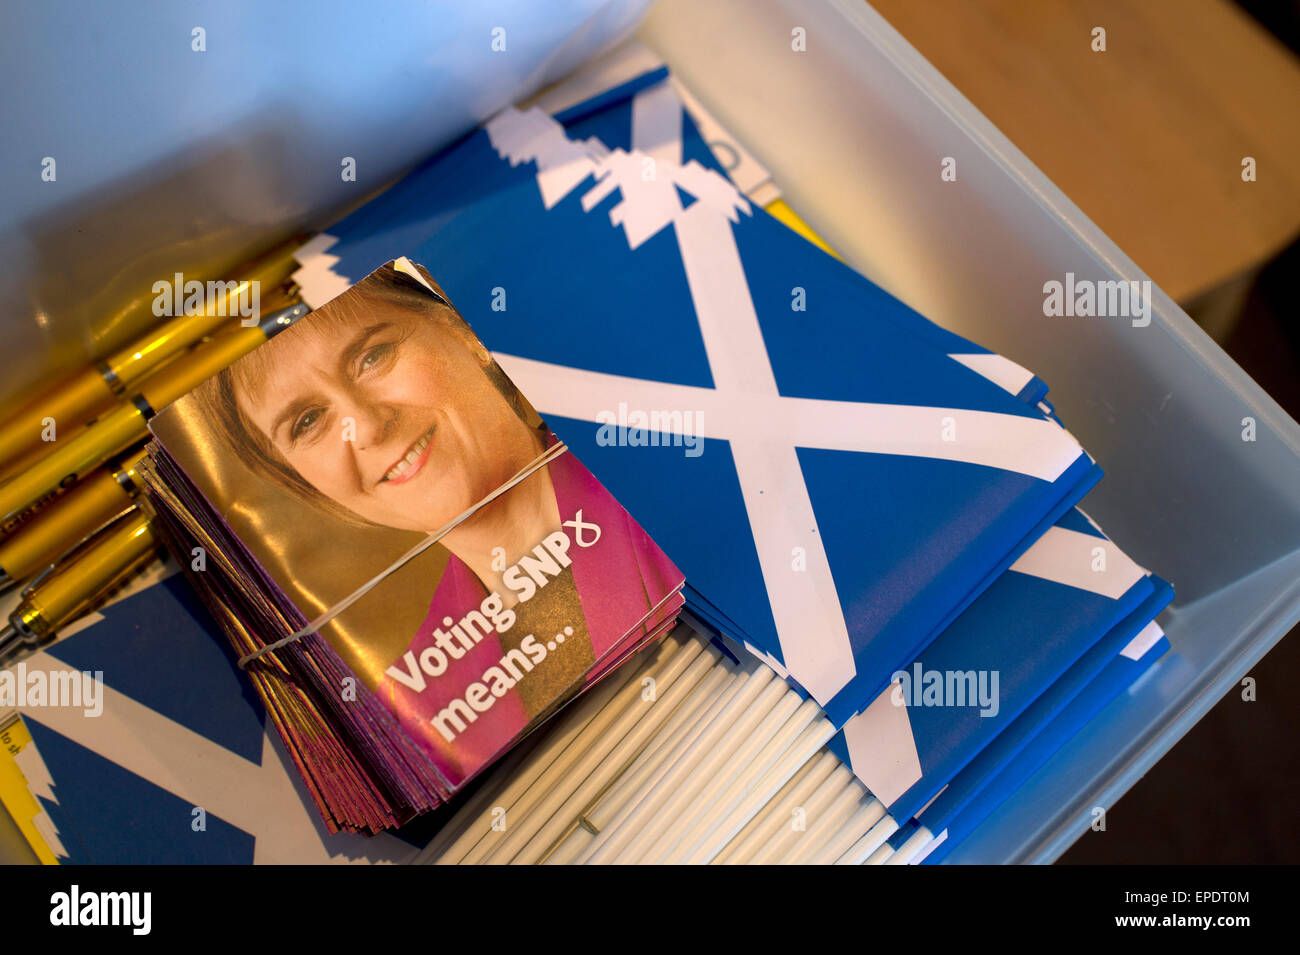 Largs, Scotland. Yes shop and SNP (Scottish National Party) office. Leaflets and flags. Stock Photo